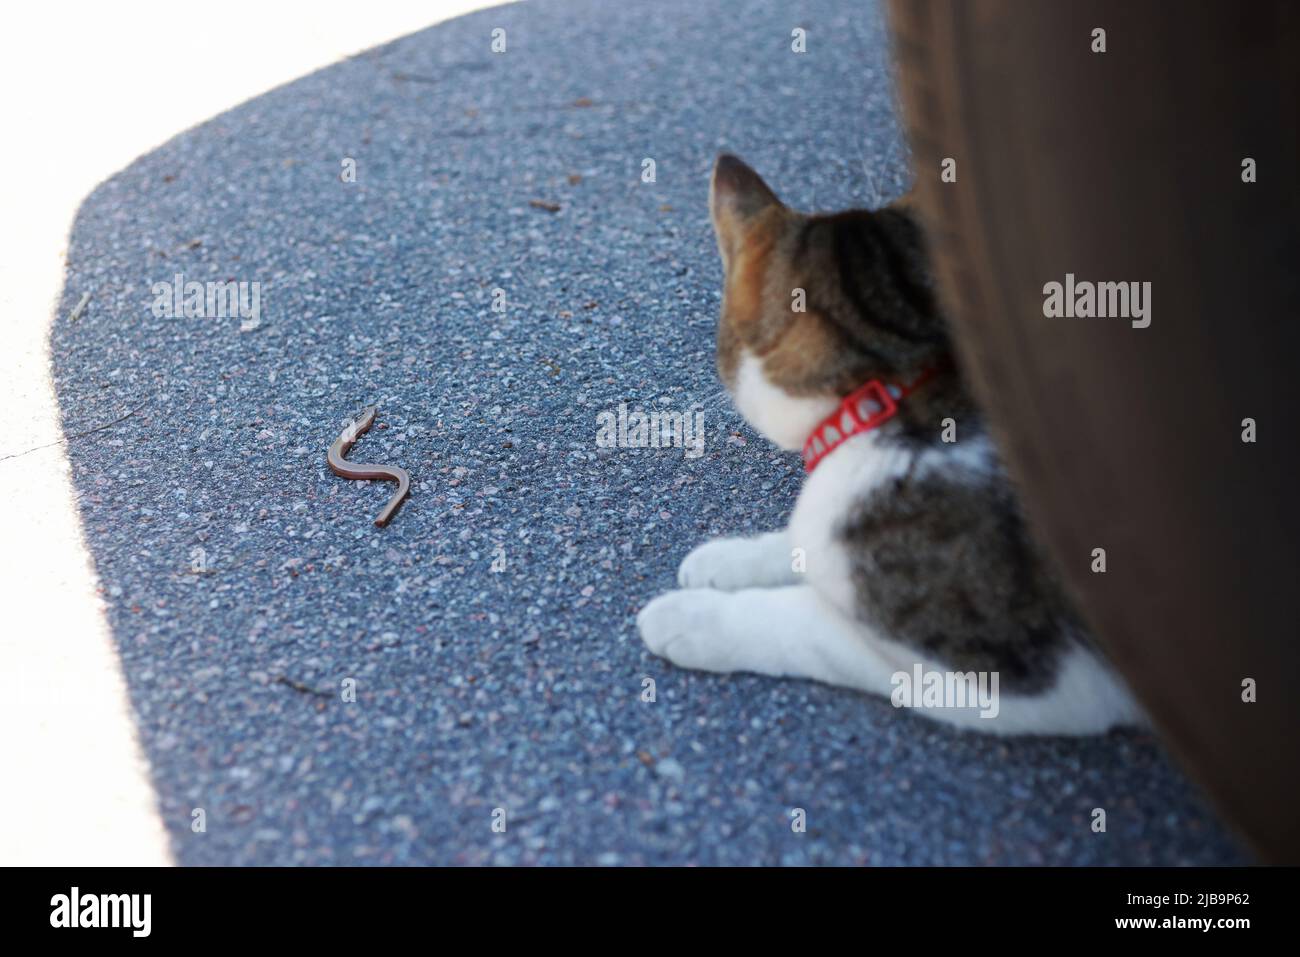 A cat that caught a slow worm in a parking lot on Wednesday in Motala, Sweden. Slip like an eel the slow worm sneaks into the woods, after a short battle. (Cat)astrophe thought the cat and moved on to new hunting targets. Stock Photo